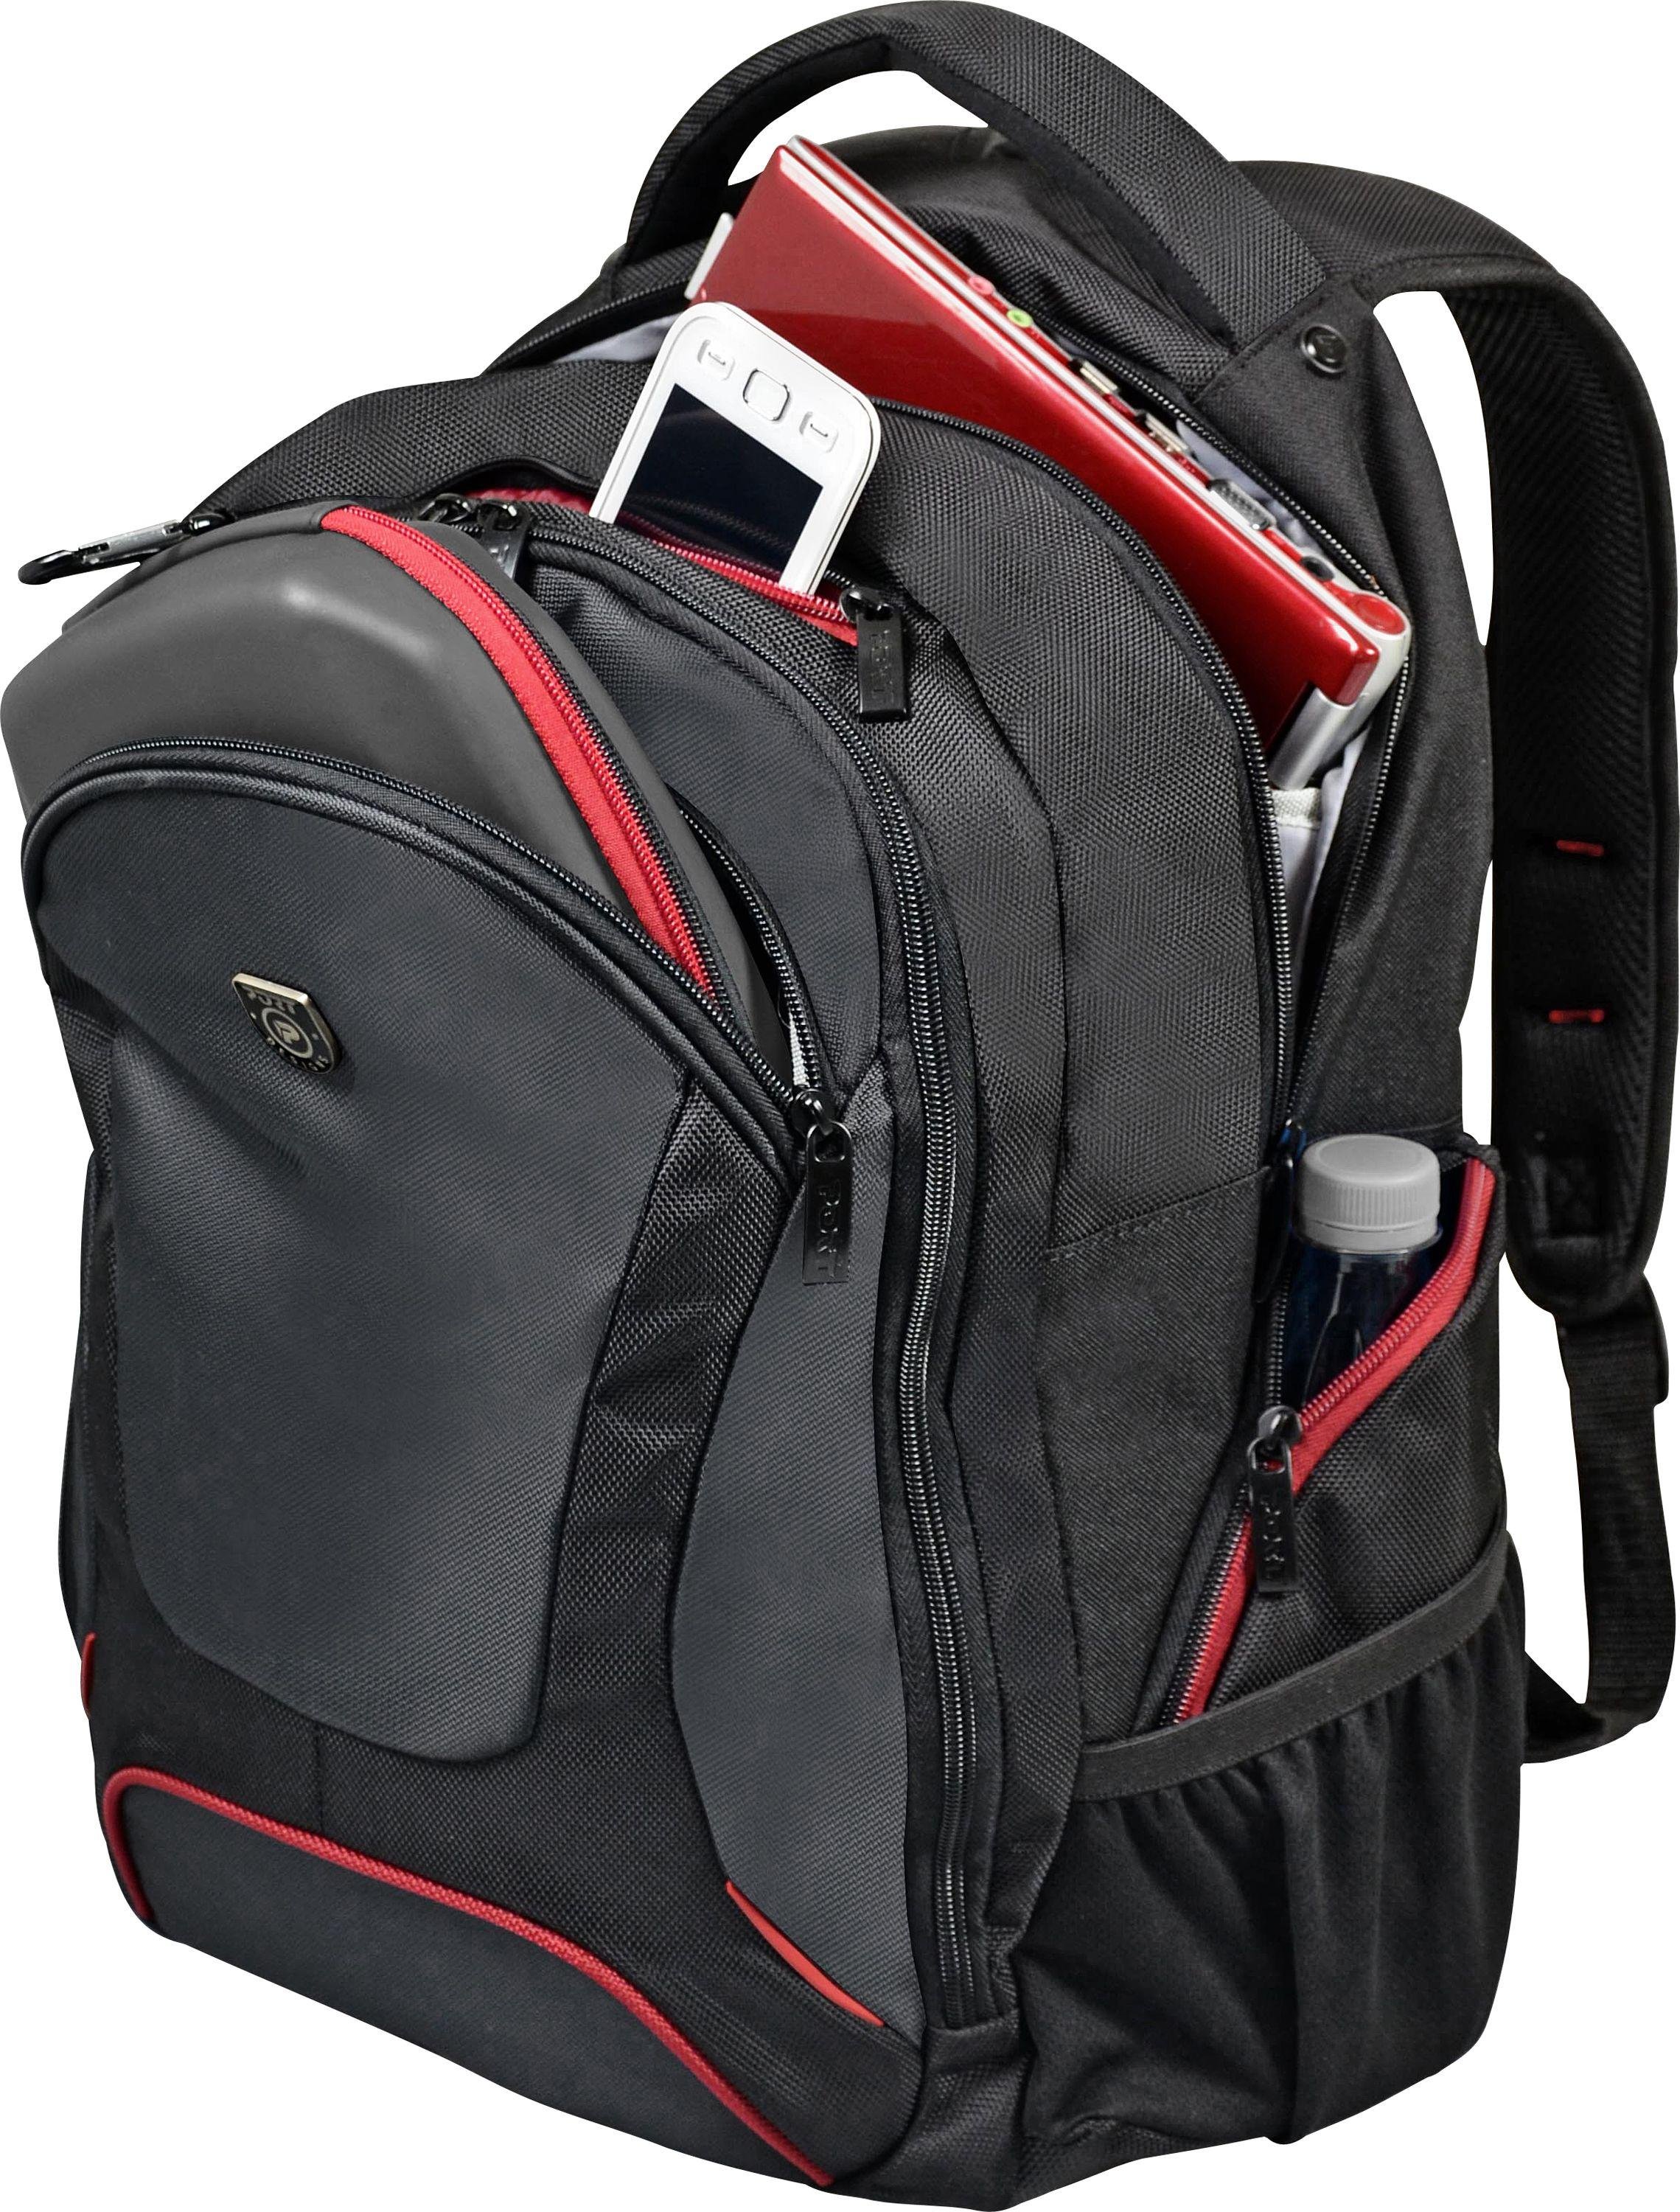 Courchevel - 15.6 Inch - Laptop Backpack - Black Review - Review ...